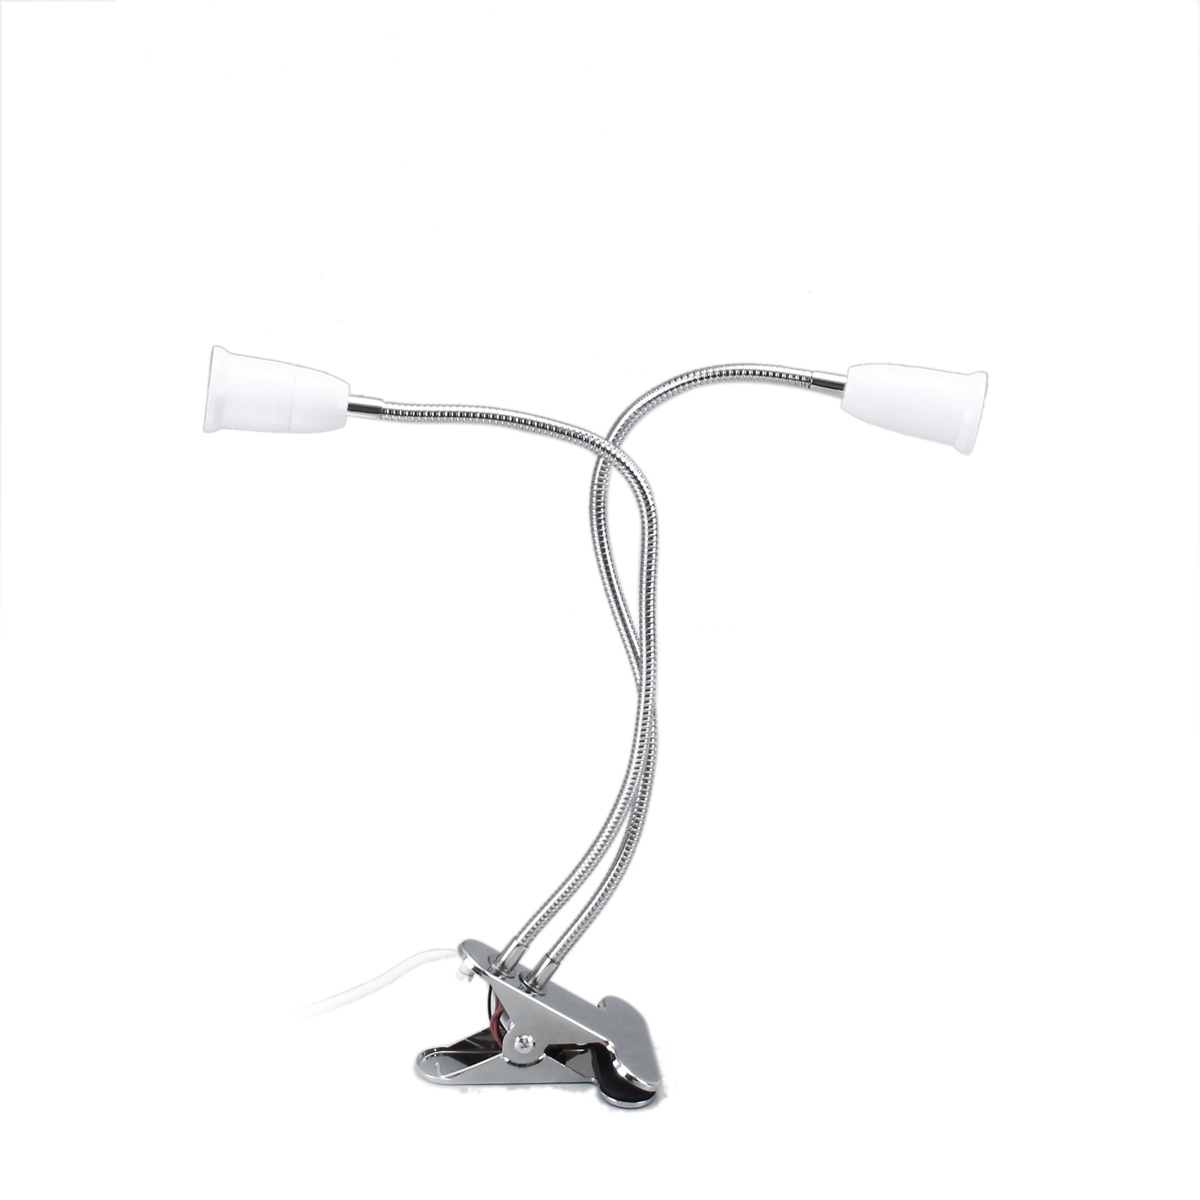 40CM E27 Flexible Dual Head Clip Lampholder Bulb Adapter with On/off Switch for LED Grow Light